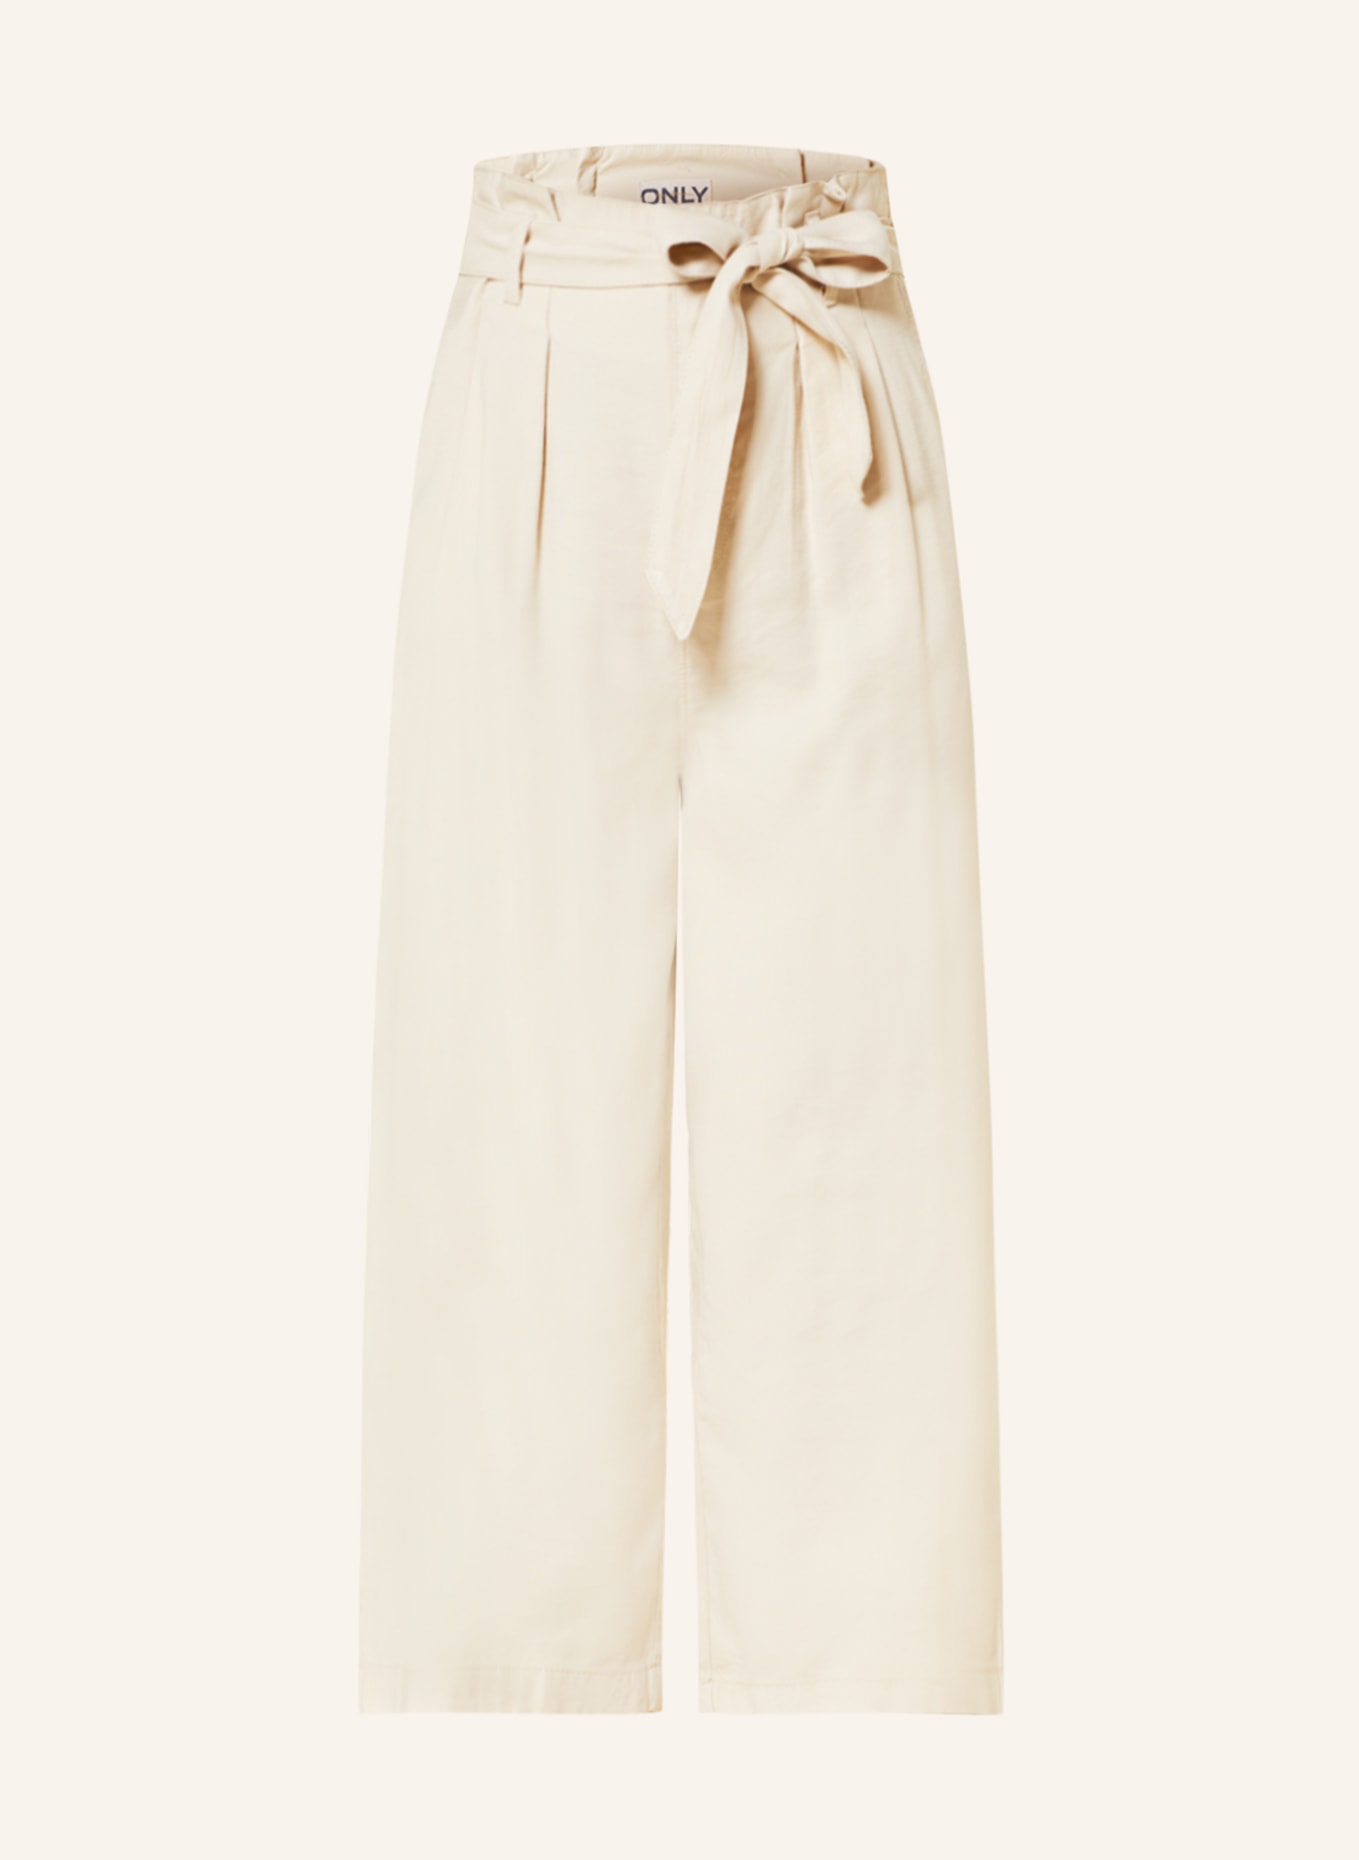 ONLY Culottes, Color: CREAM (Image 1)